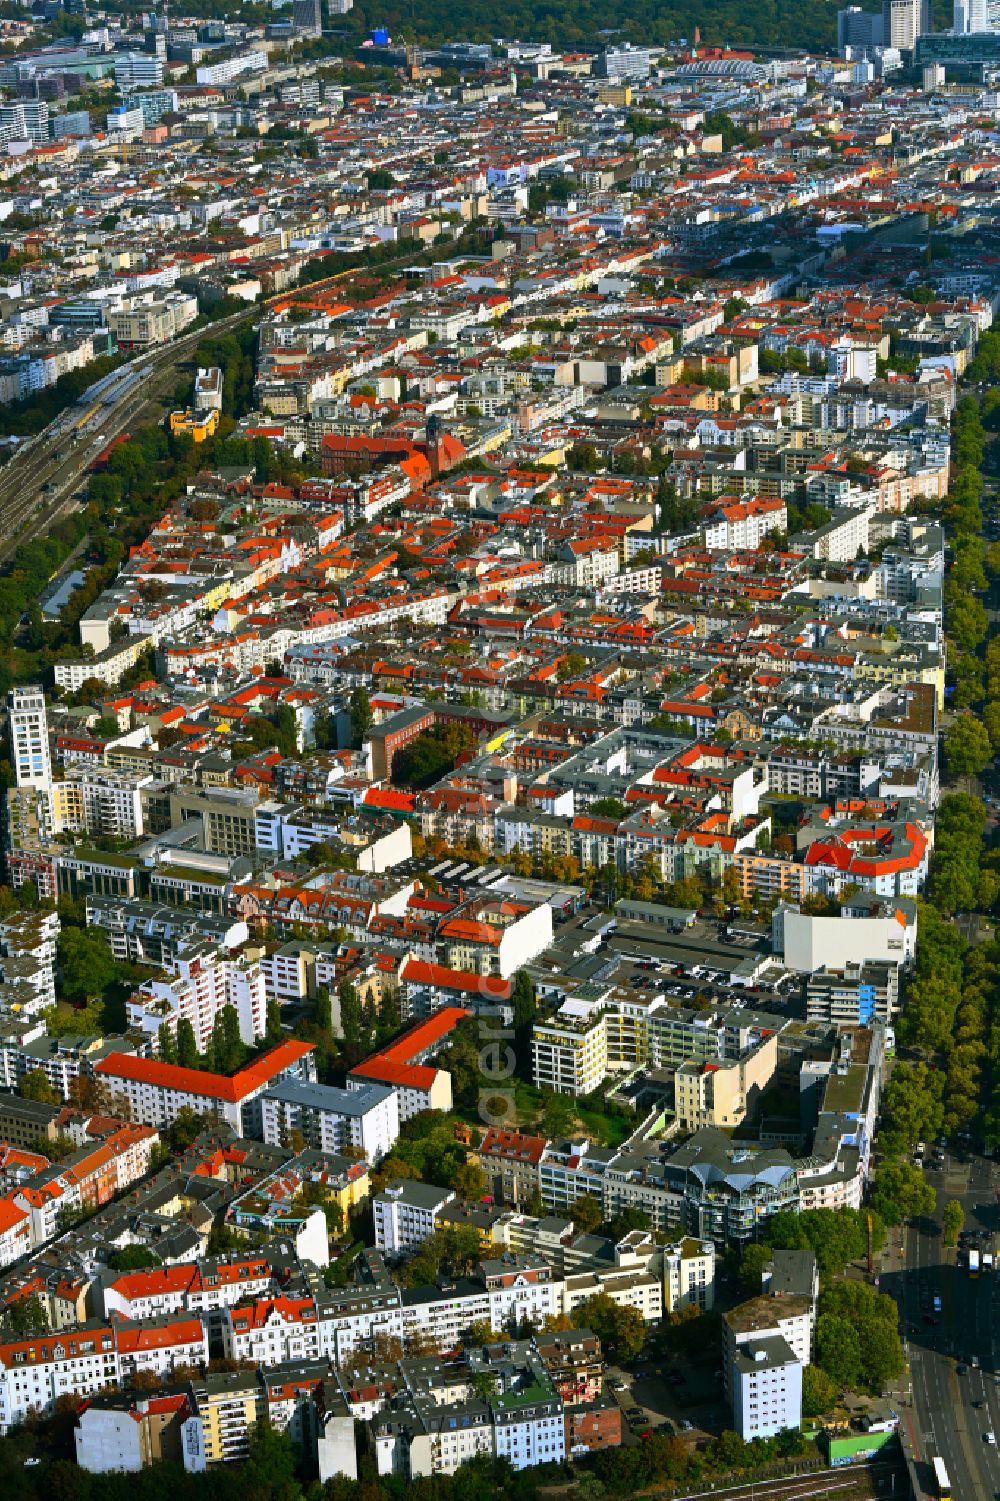 Aerial image Berlin - City view in the urban area between Ringbahn and Kurfuerstendamm in the district Charlottenburg in Berlin, Germany